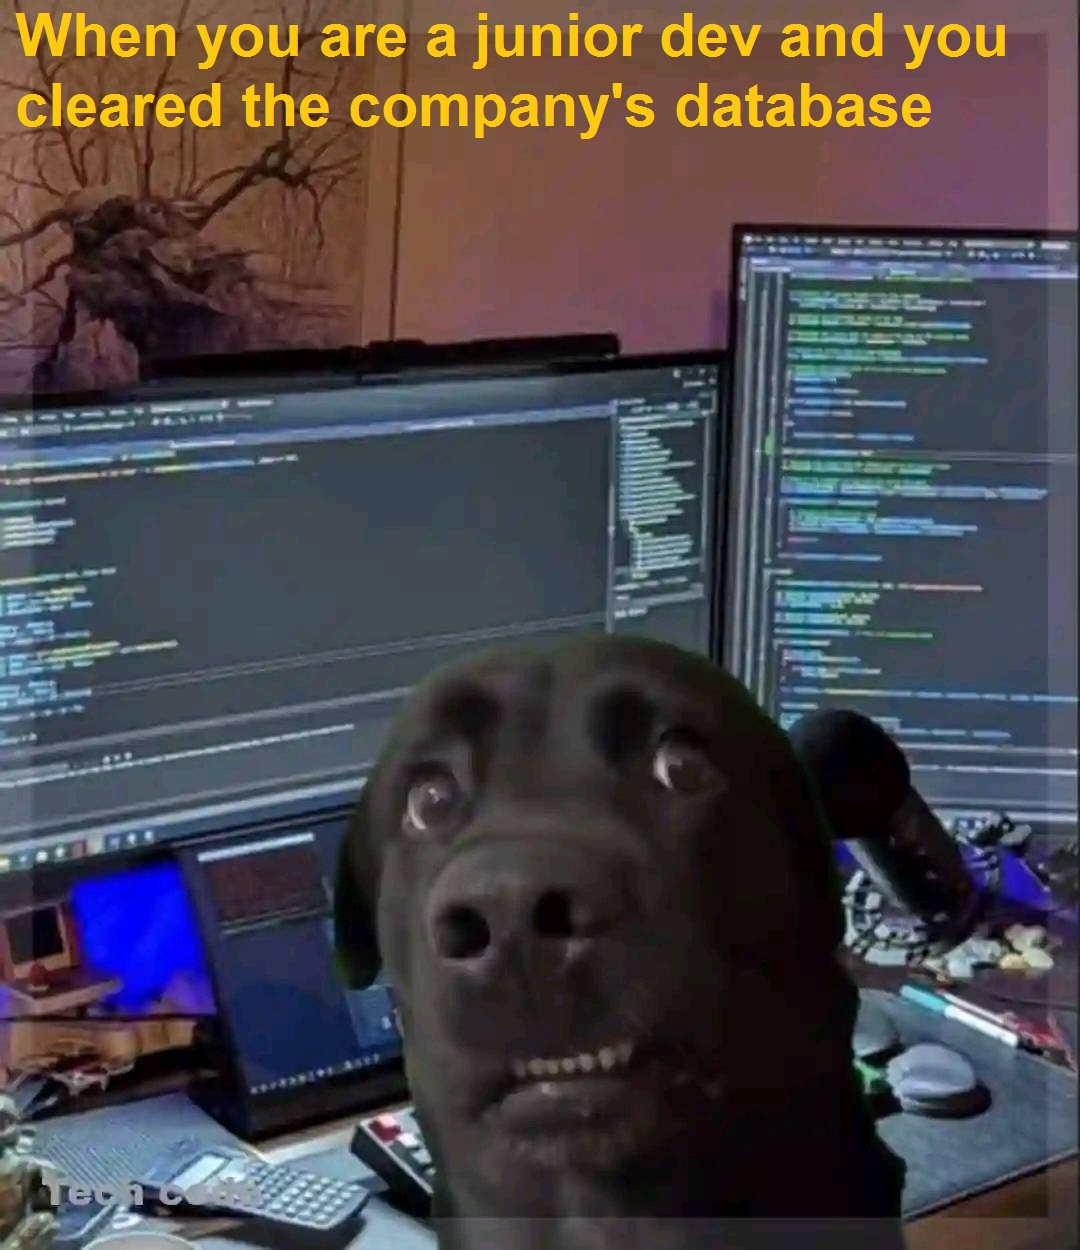 When you are a junior dev and you cleared the company's database